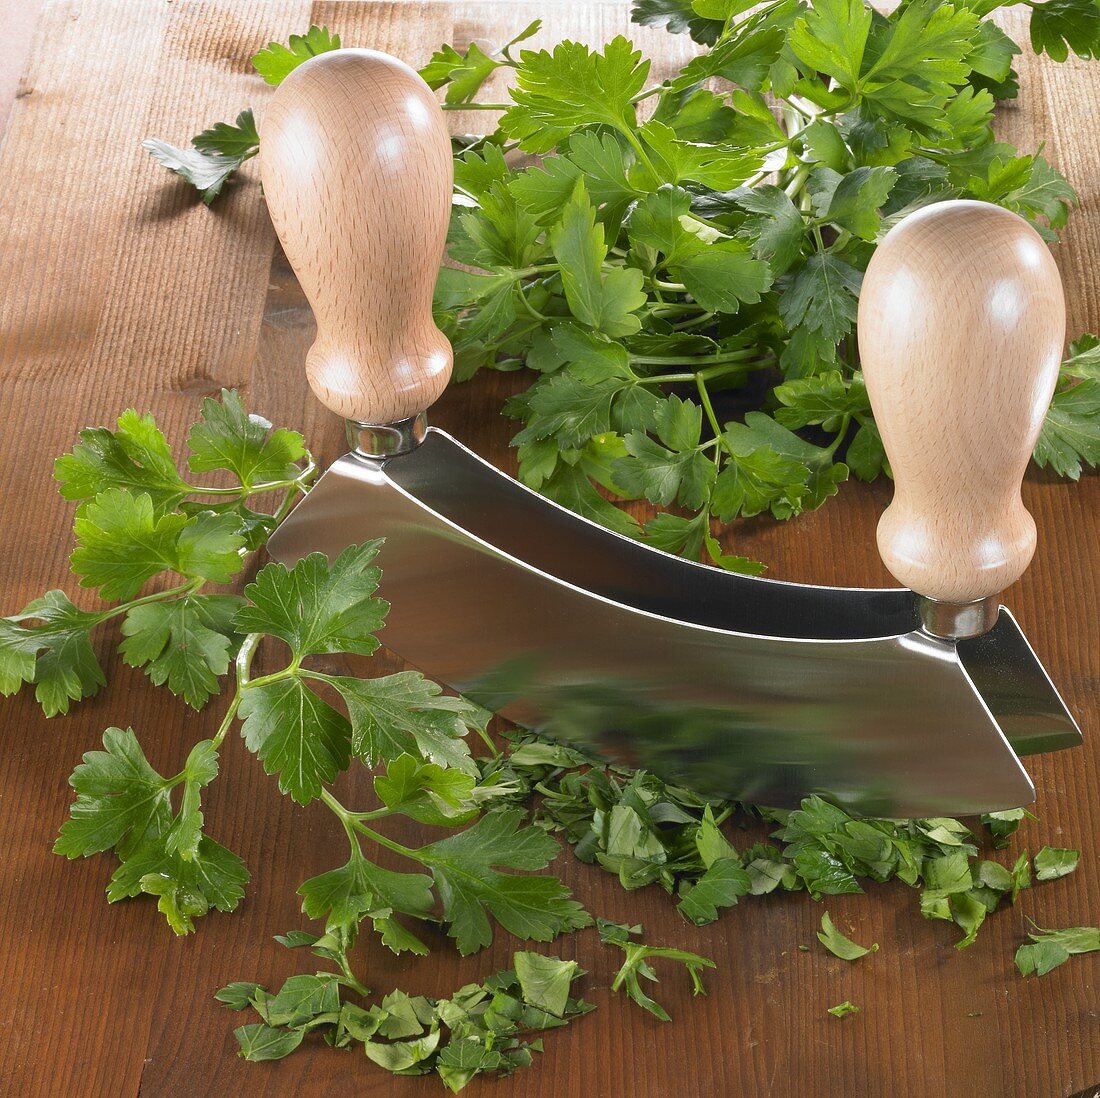 Parsley and a chopping knife